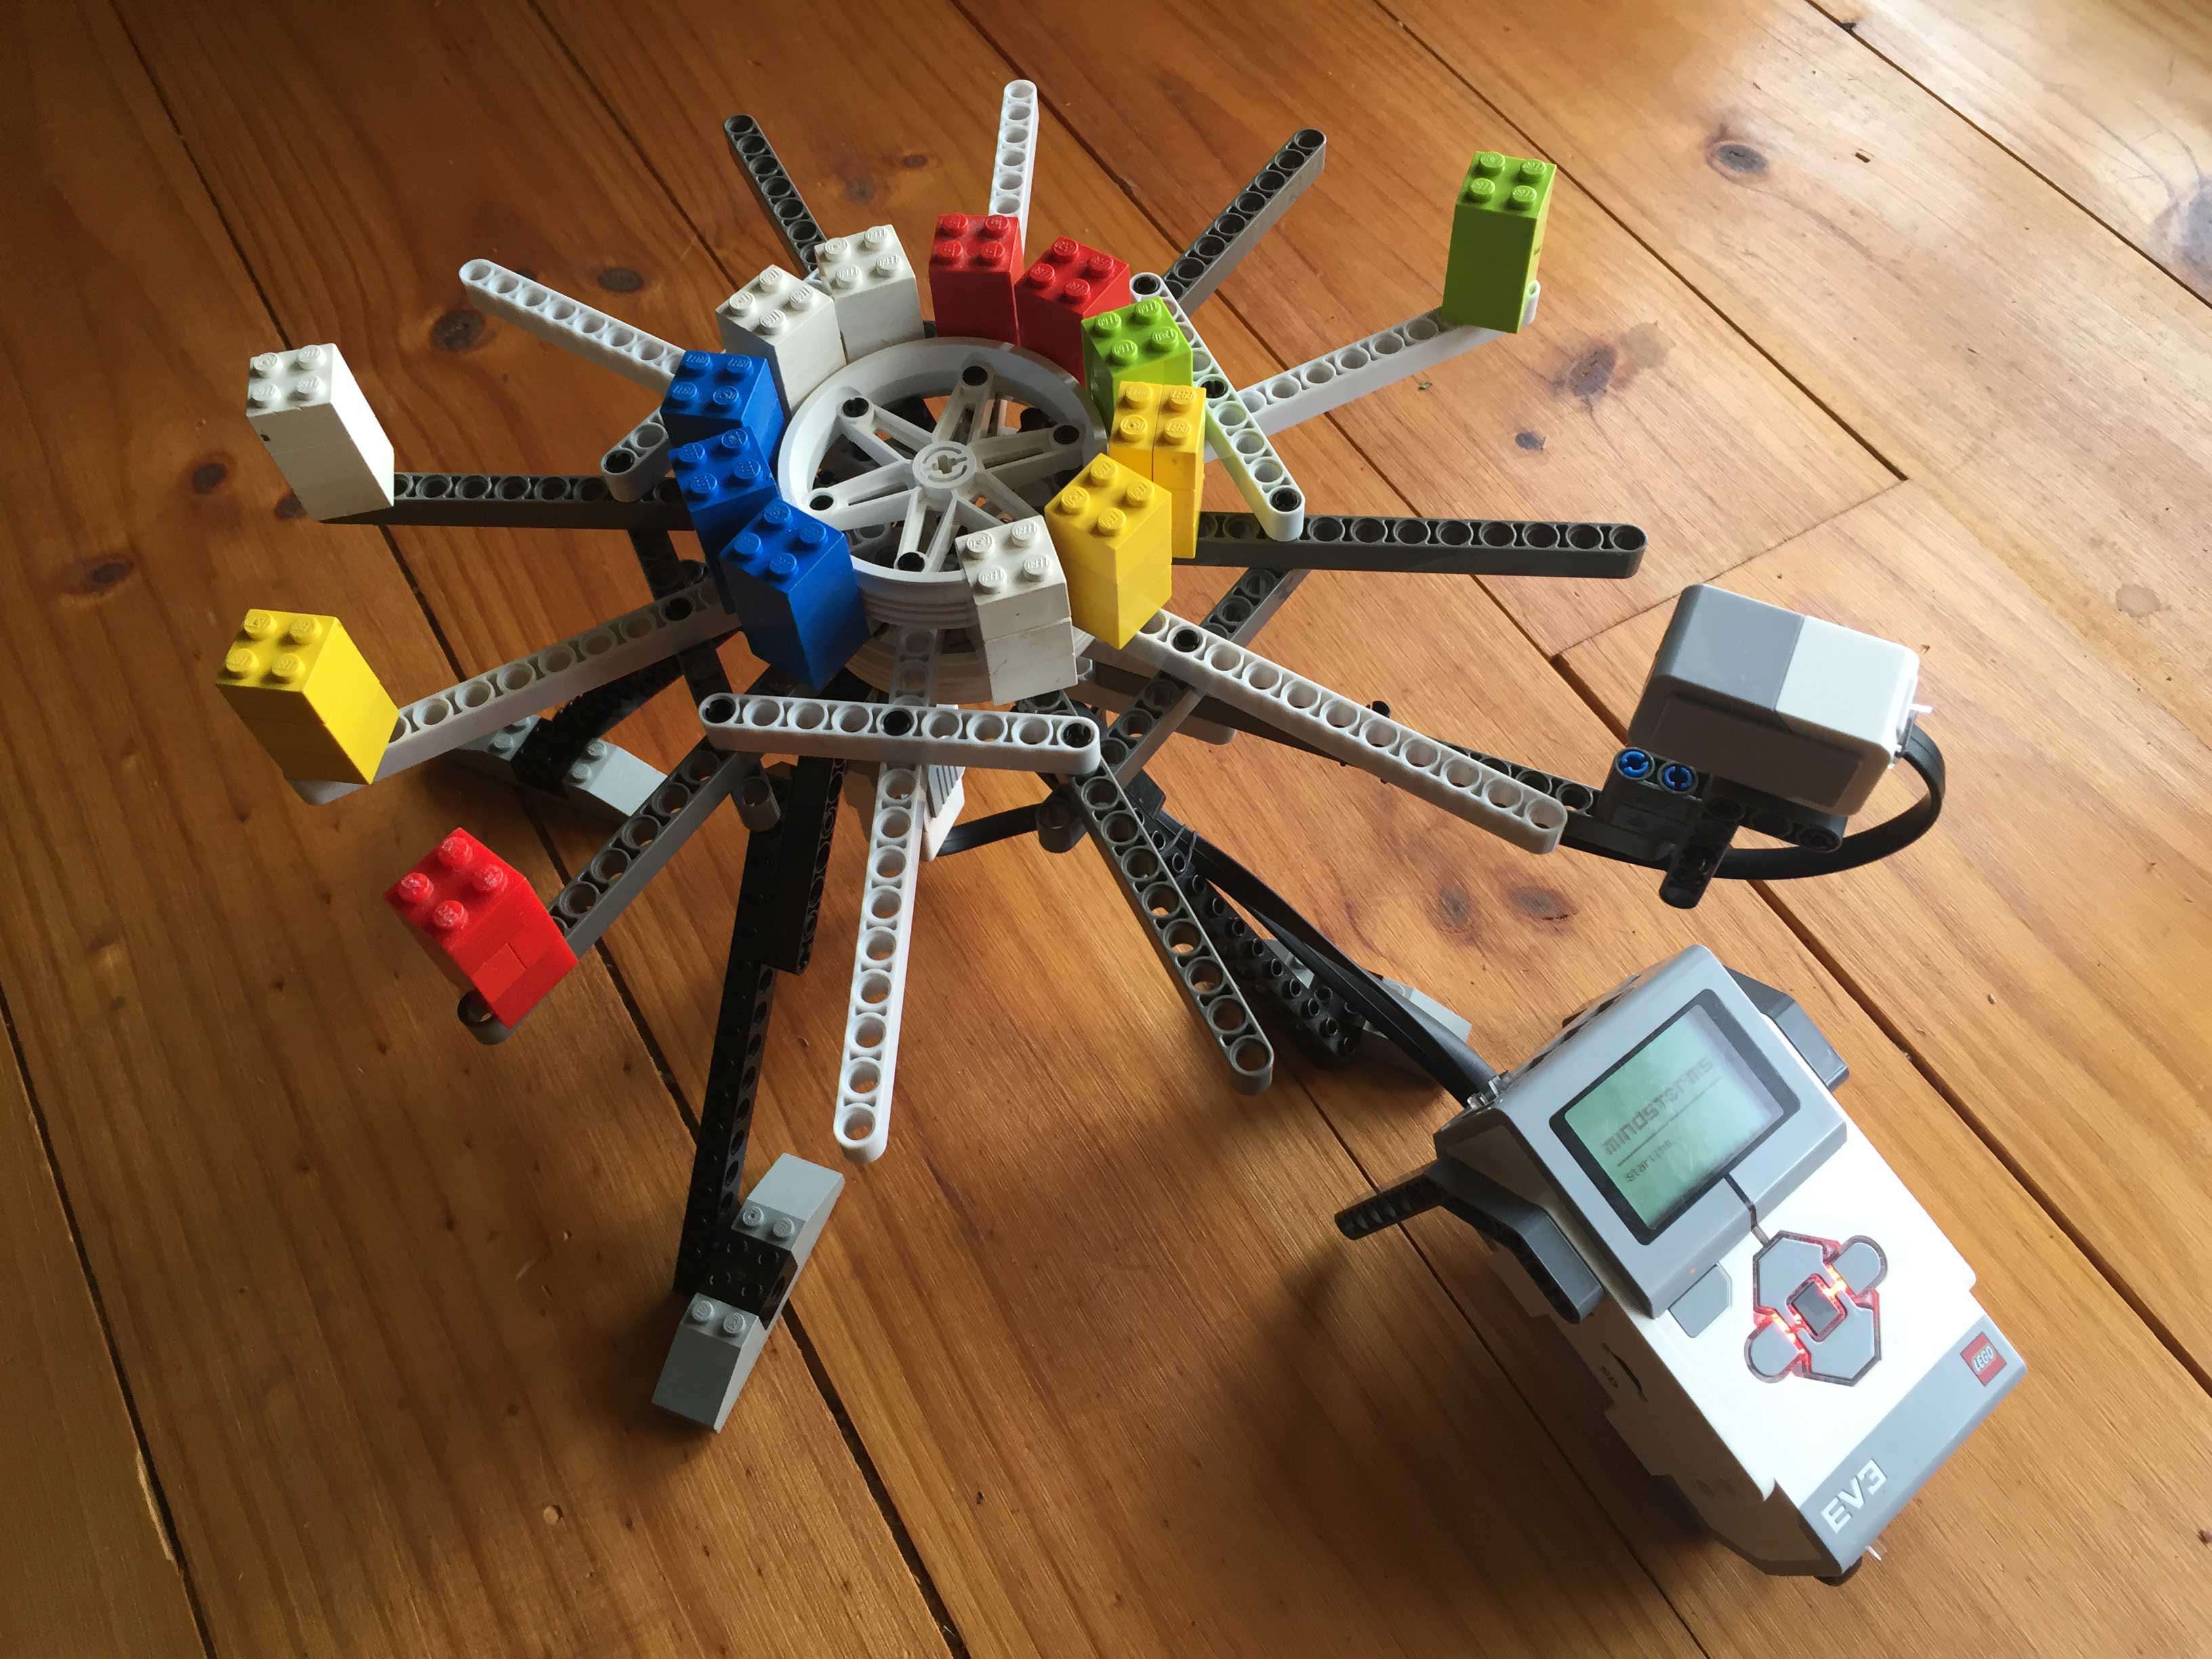 Compose Synthy Samples with a Lego Sound Sequencer